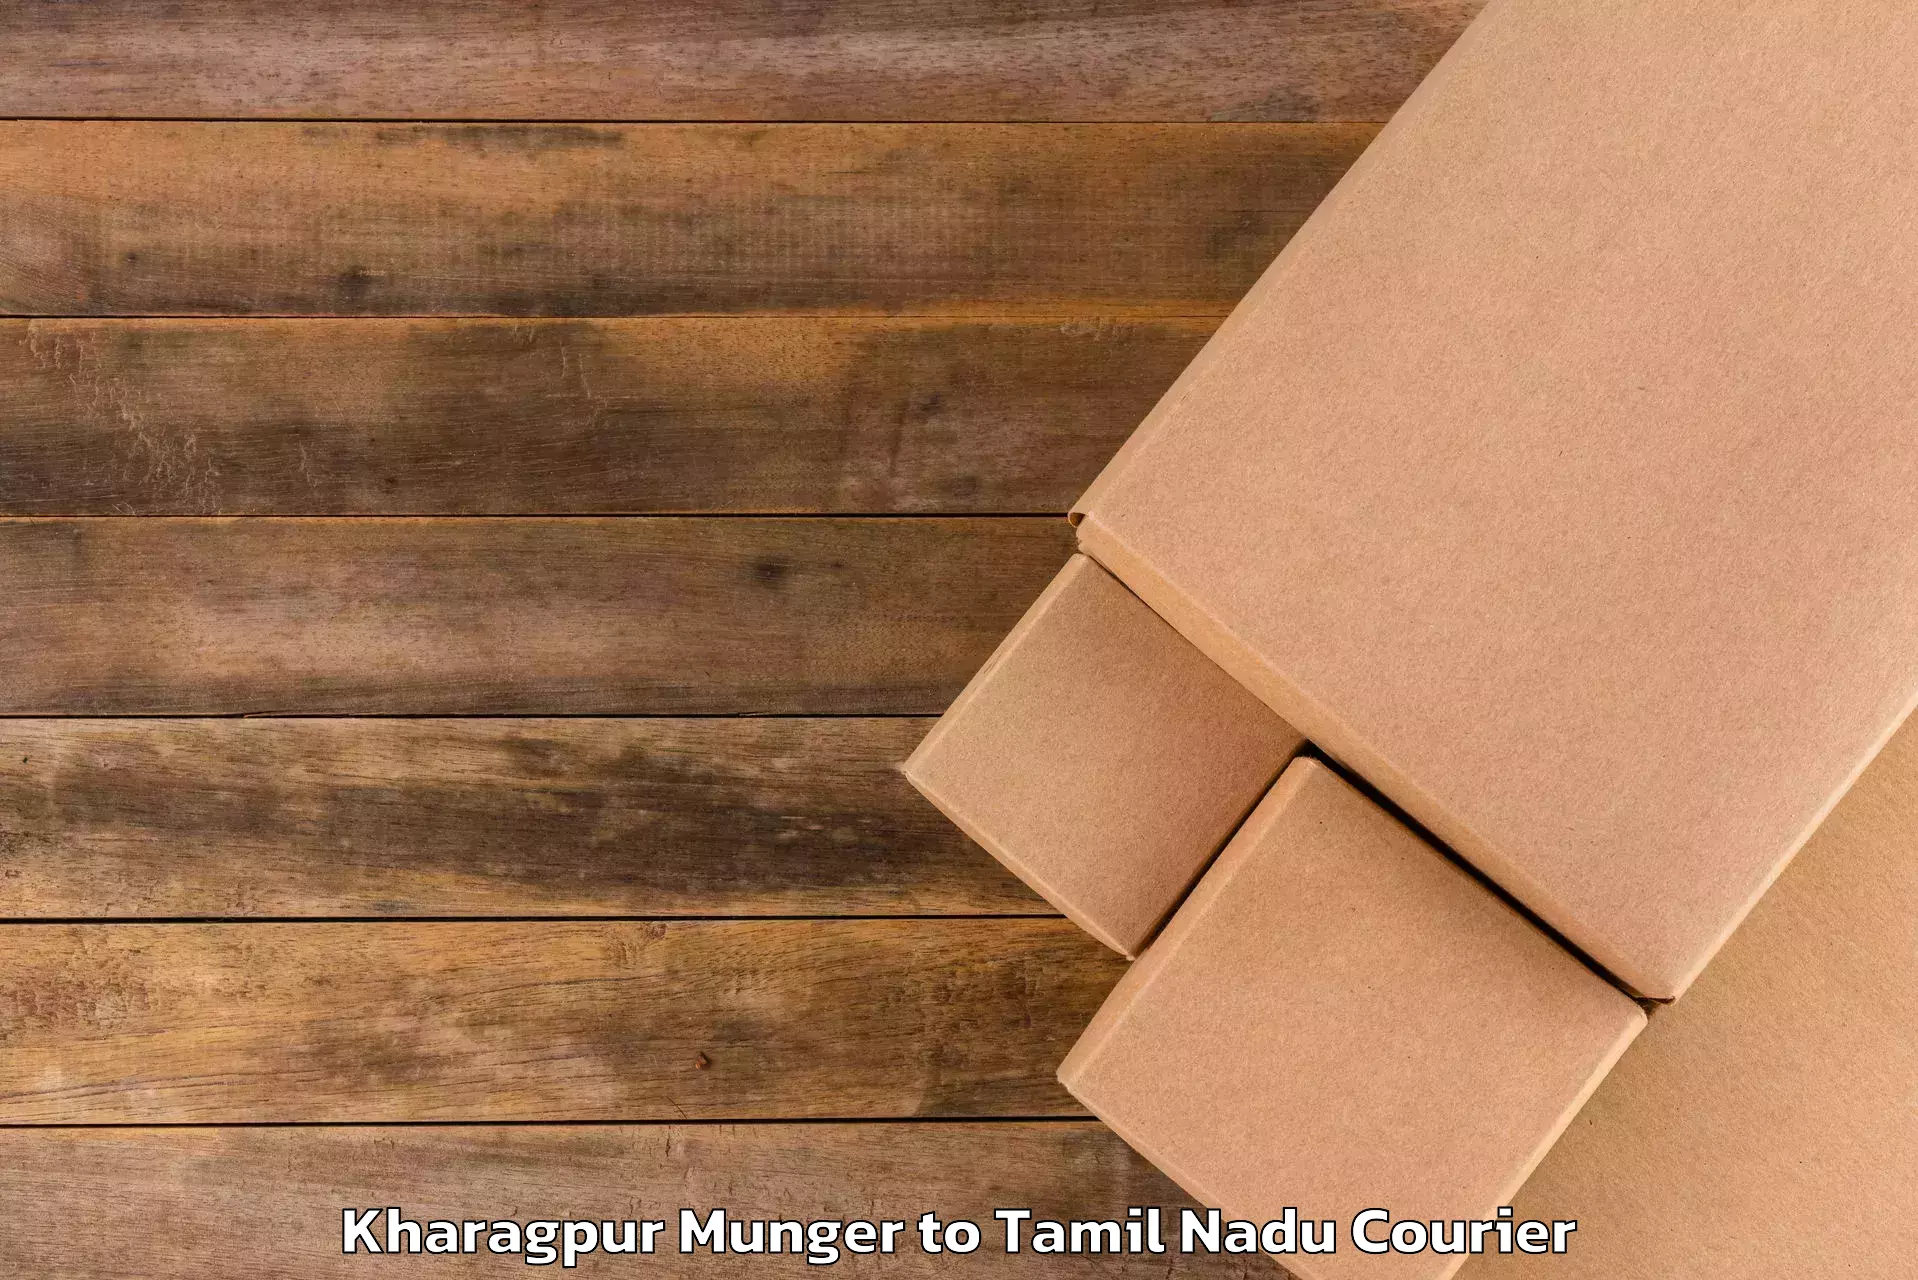 Fast track baggage delivery Kharagpur Munger to Chennai Port